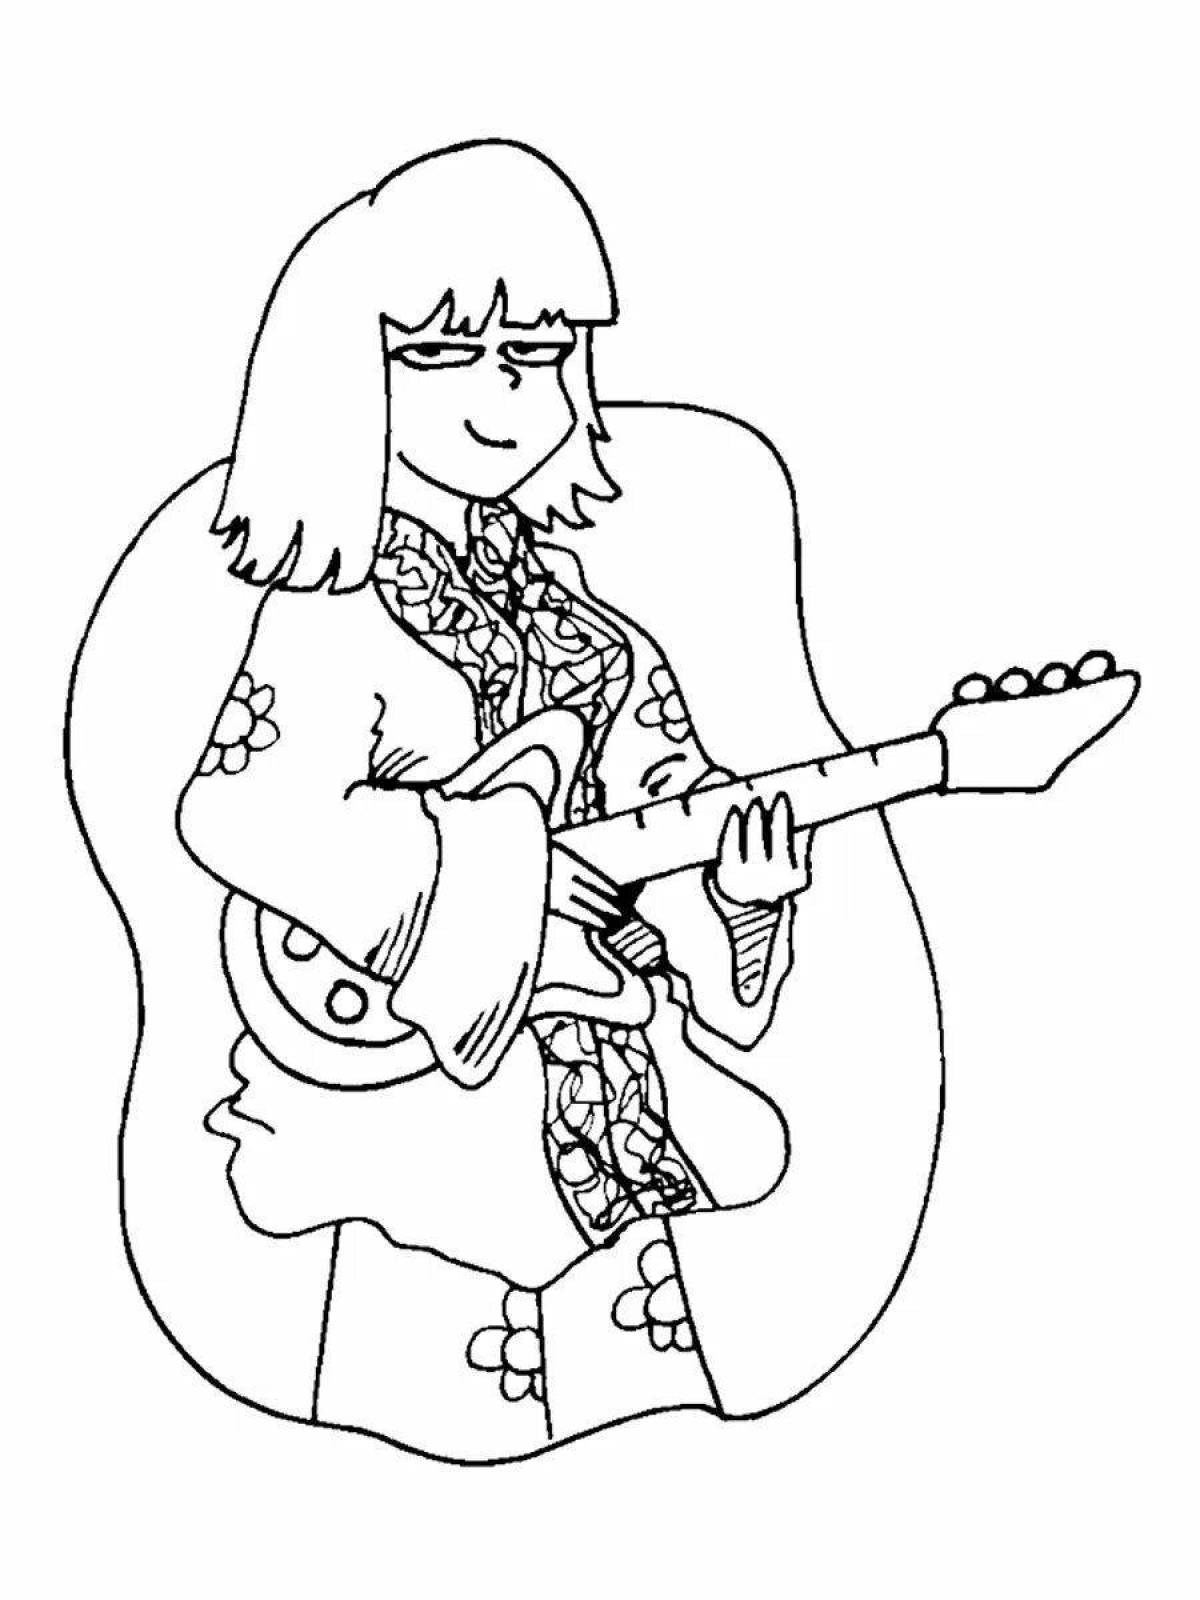 Coloring page brilliant singer for kids